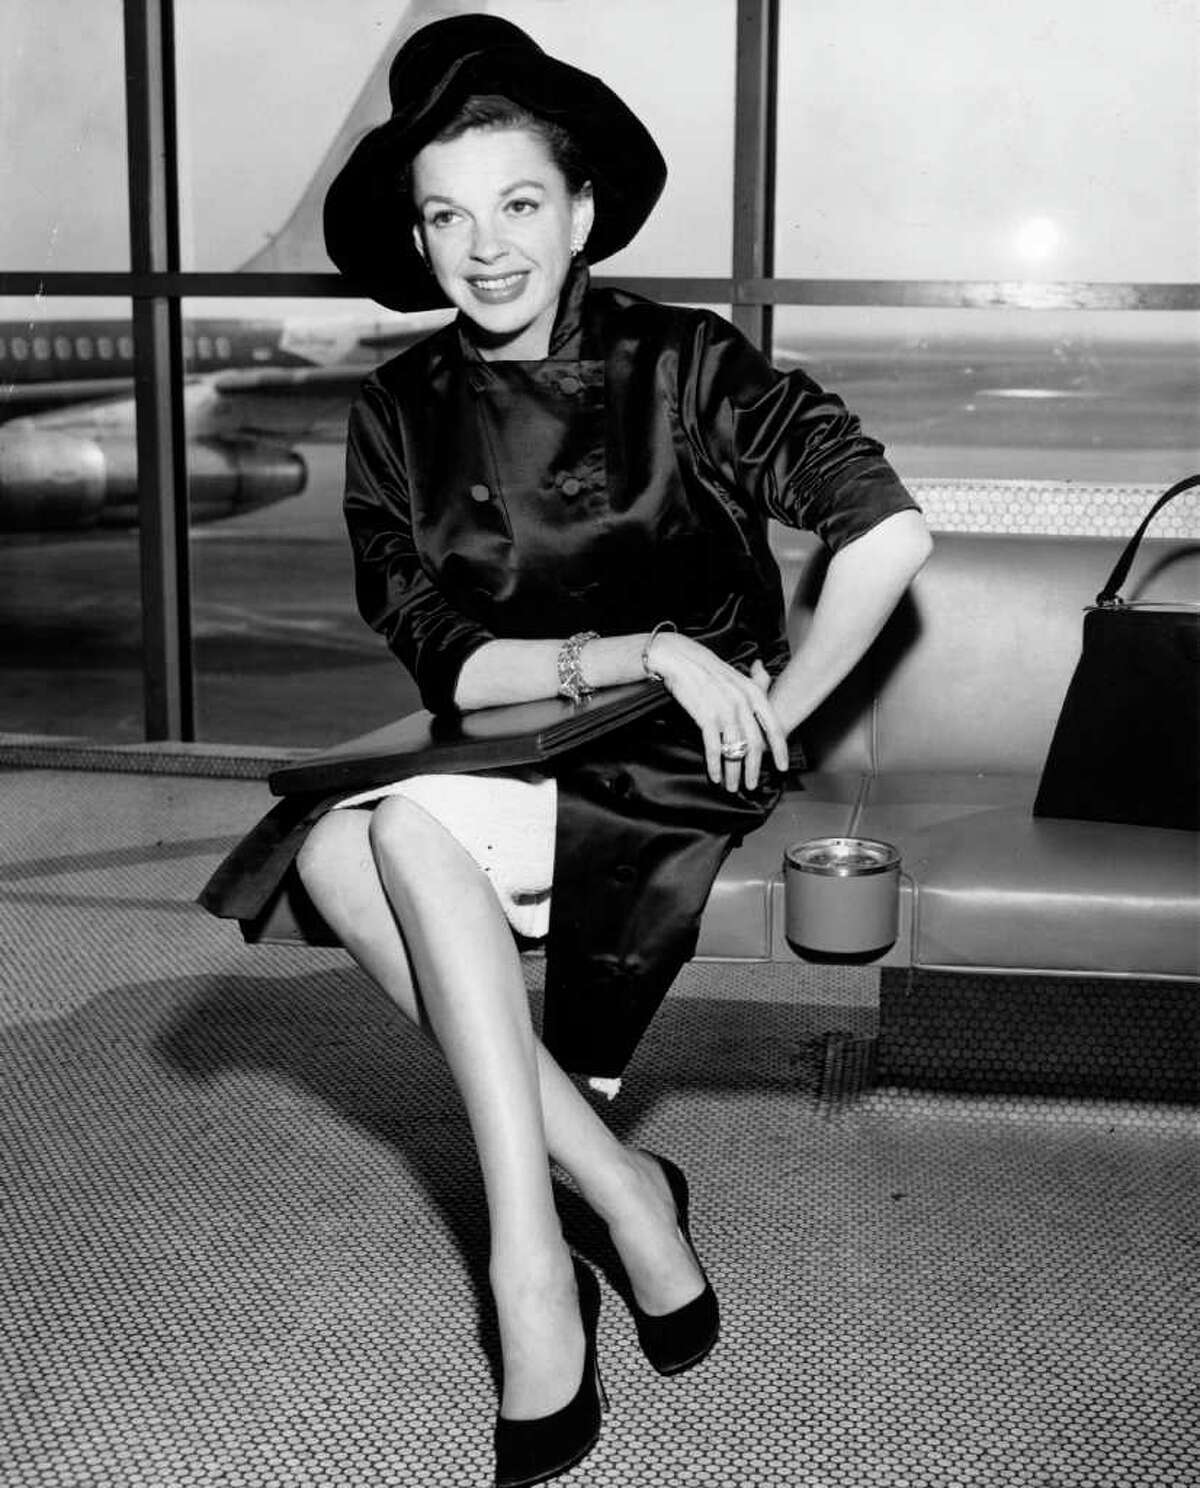 Here's singer and film star Judy Garland at an unidentified airport, circa 1955. Note the ashtray.